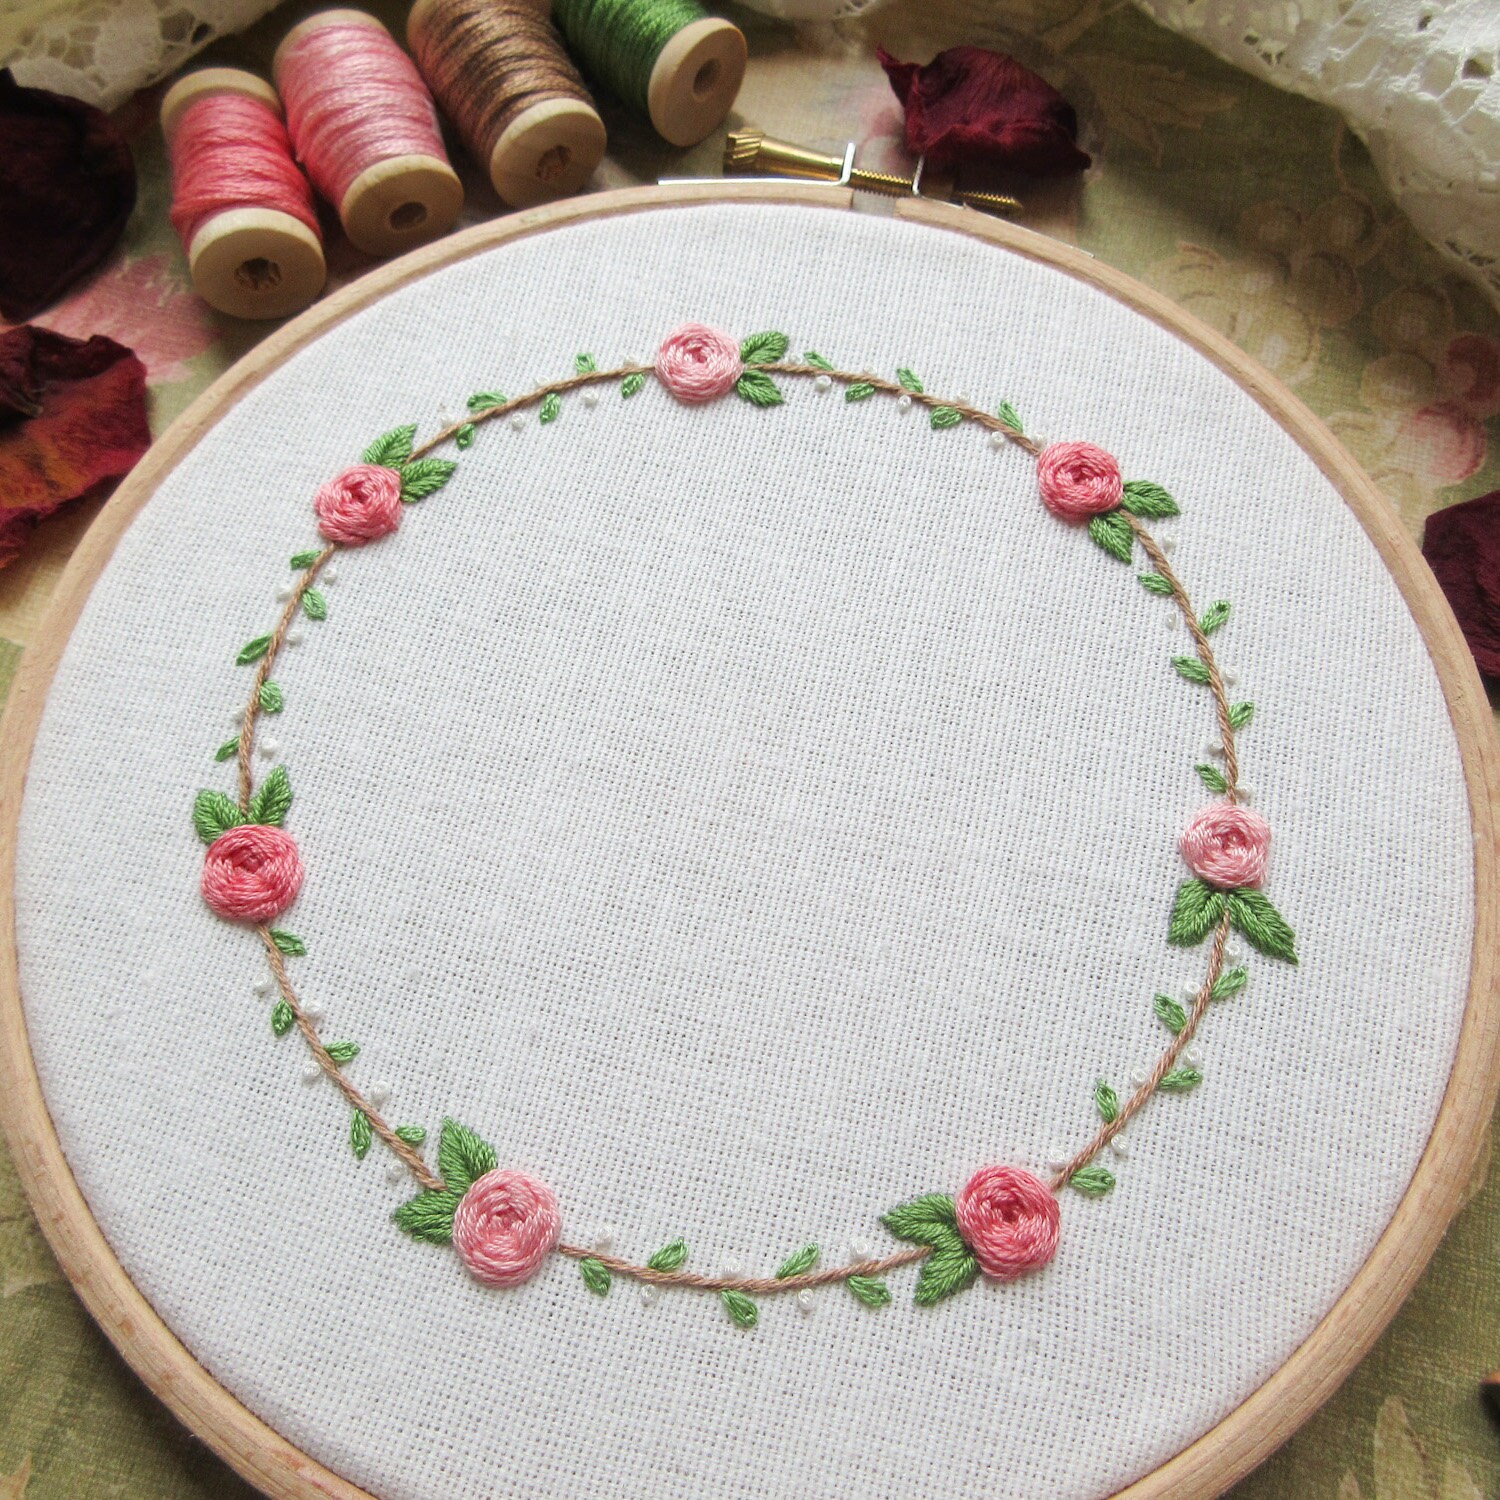 How to do Simple Embroidery on Felt Beads (rosiepink)